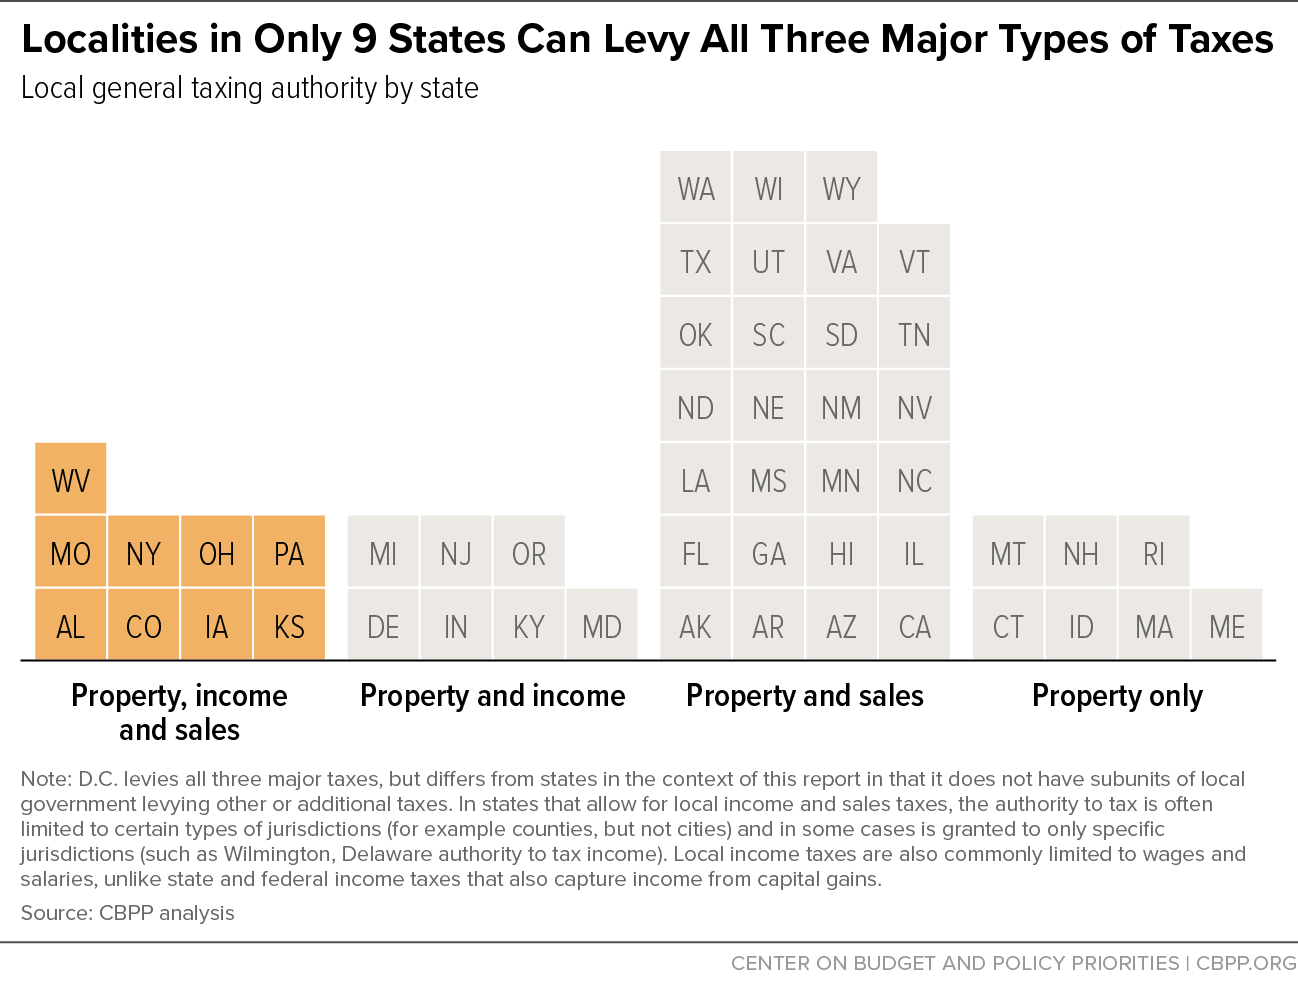 Localities in Only 9 States Can Levy All Three Major Types of Taxes